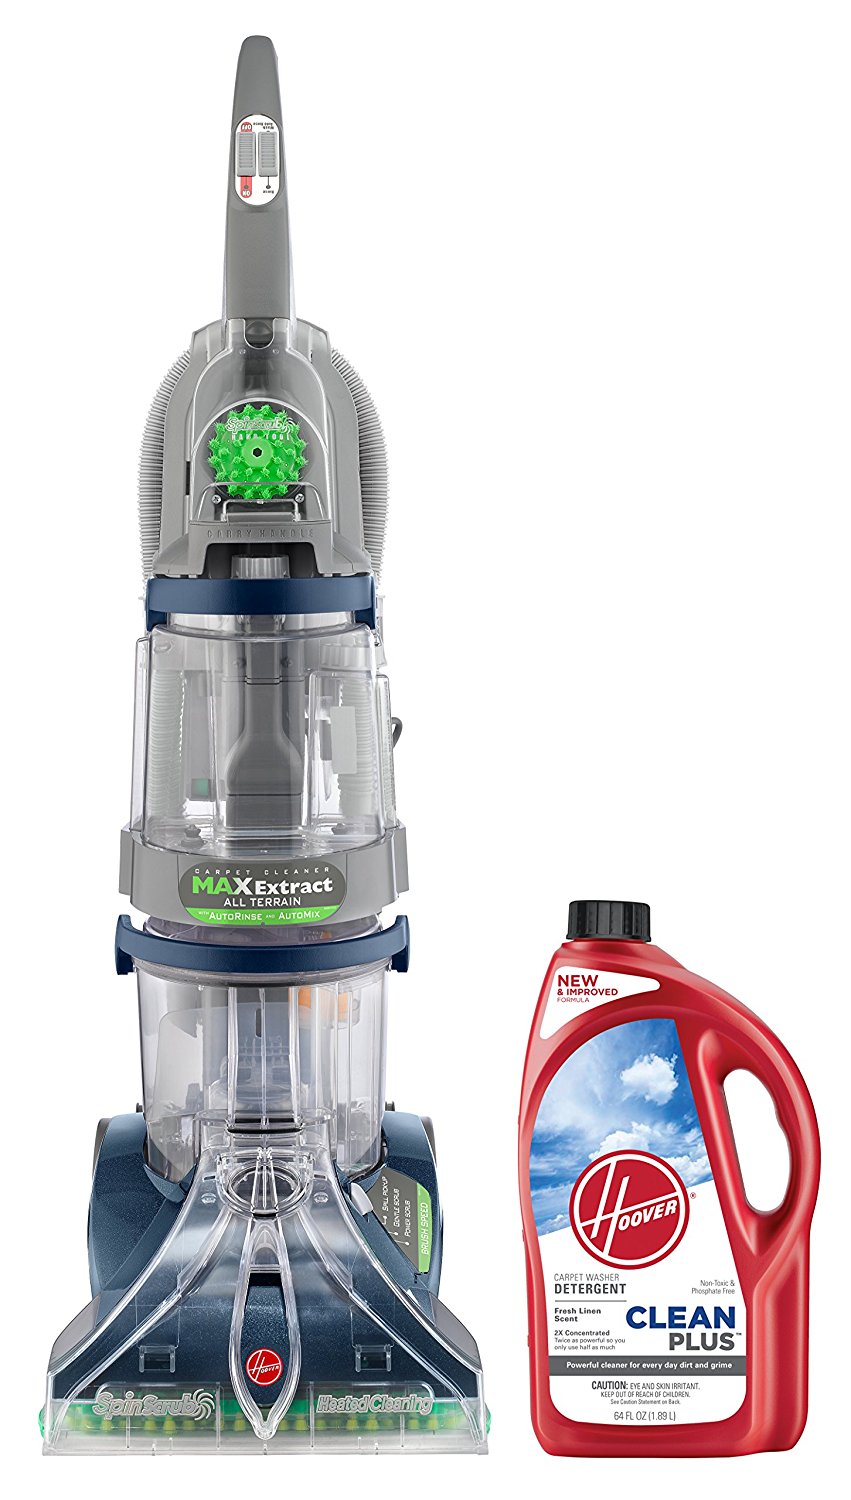 Hoover Carpet Cleaner Max Extract Dual V All Terrain Hardwood Floor and Carpet Cleaner Machine F7452900PC